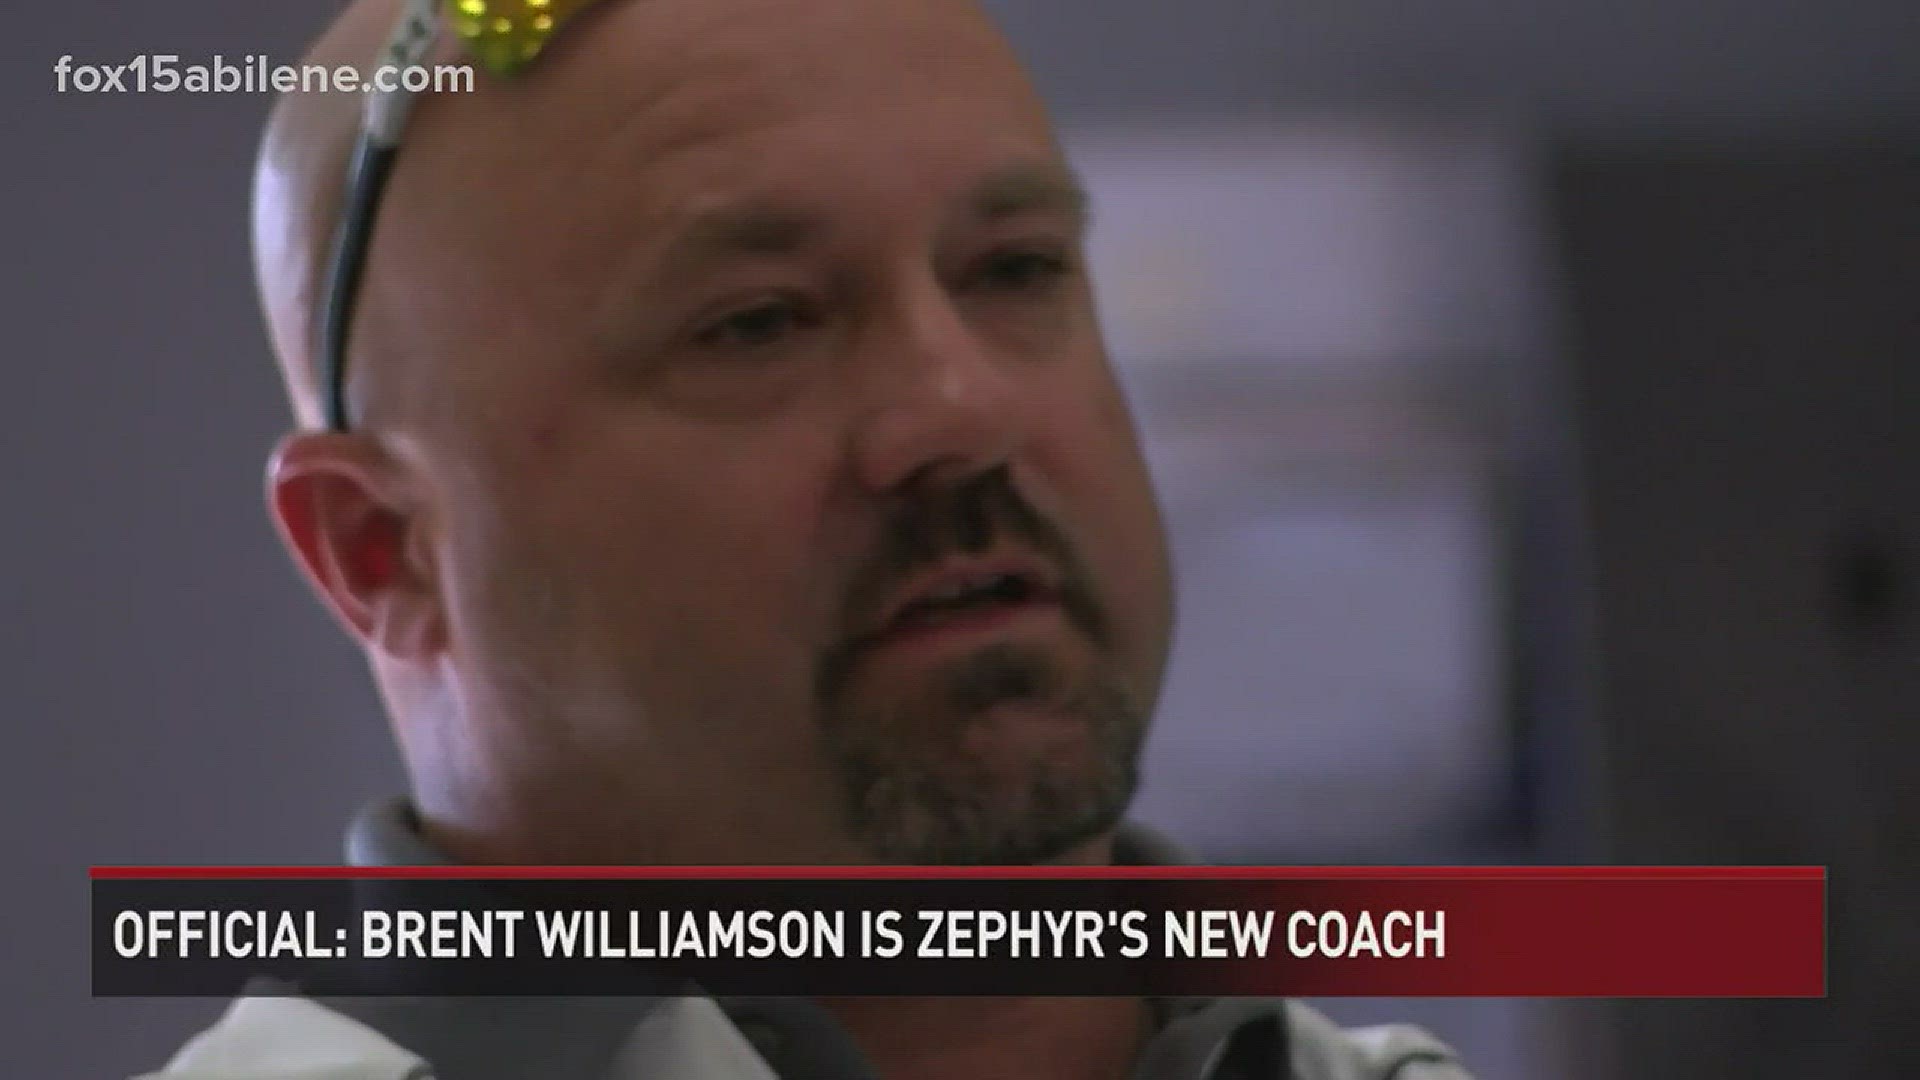 Zephyr sports have become synonymous with successful performances. That brings a lot of pressure for new head football coach and athletic director Brent Williamson. However, he is embracing and looking forward to that challenge.